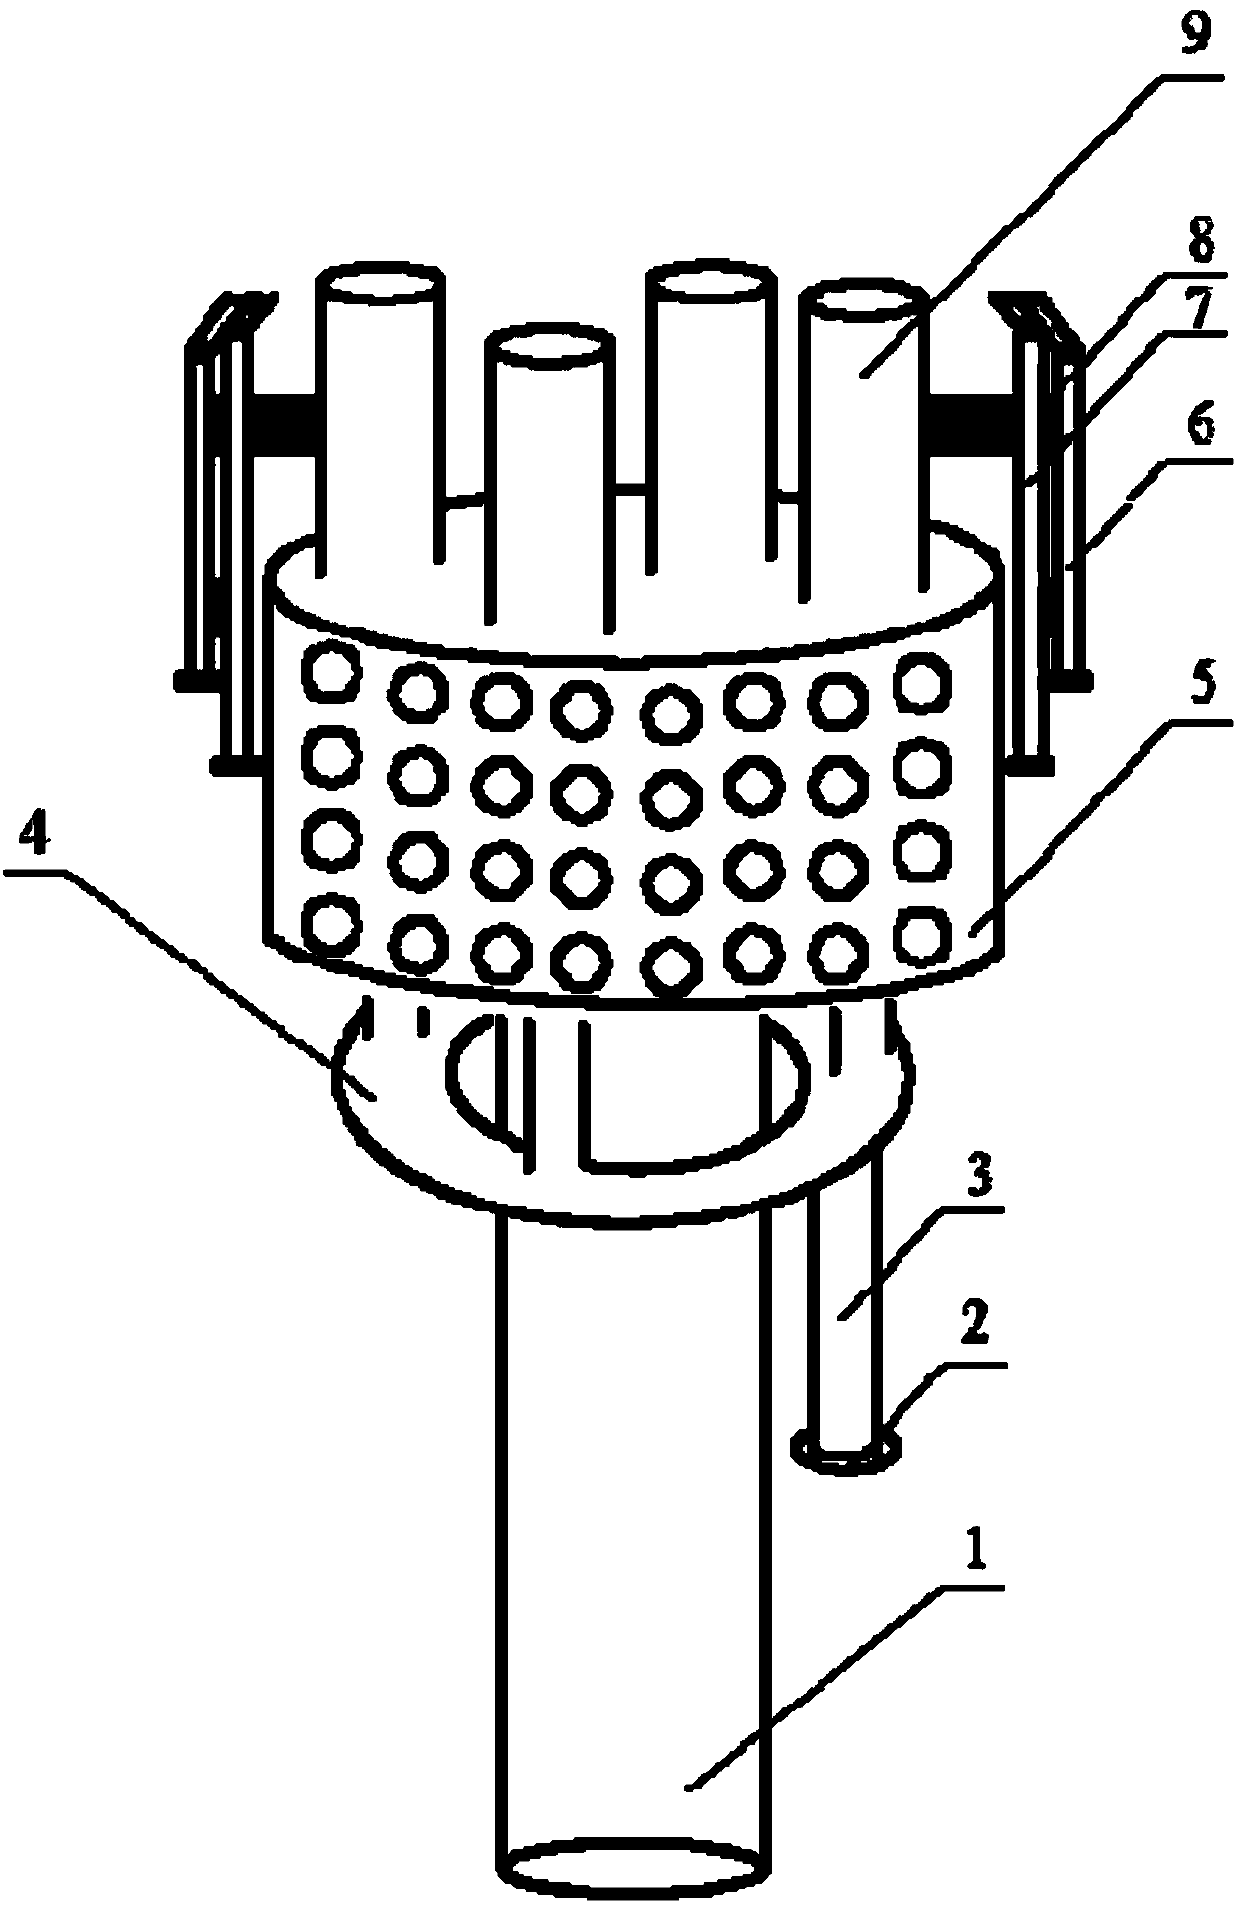 Steam burning supporting type torch burner